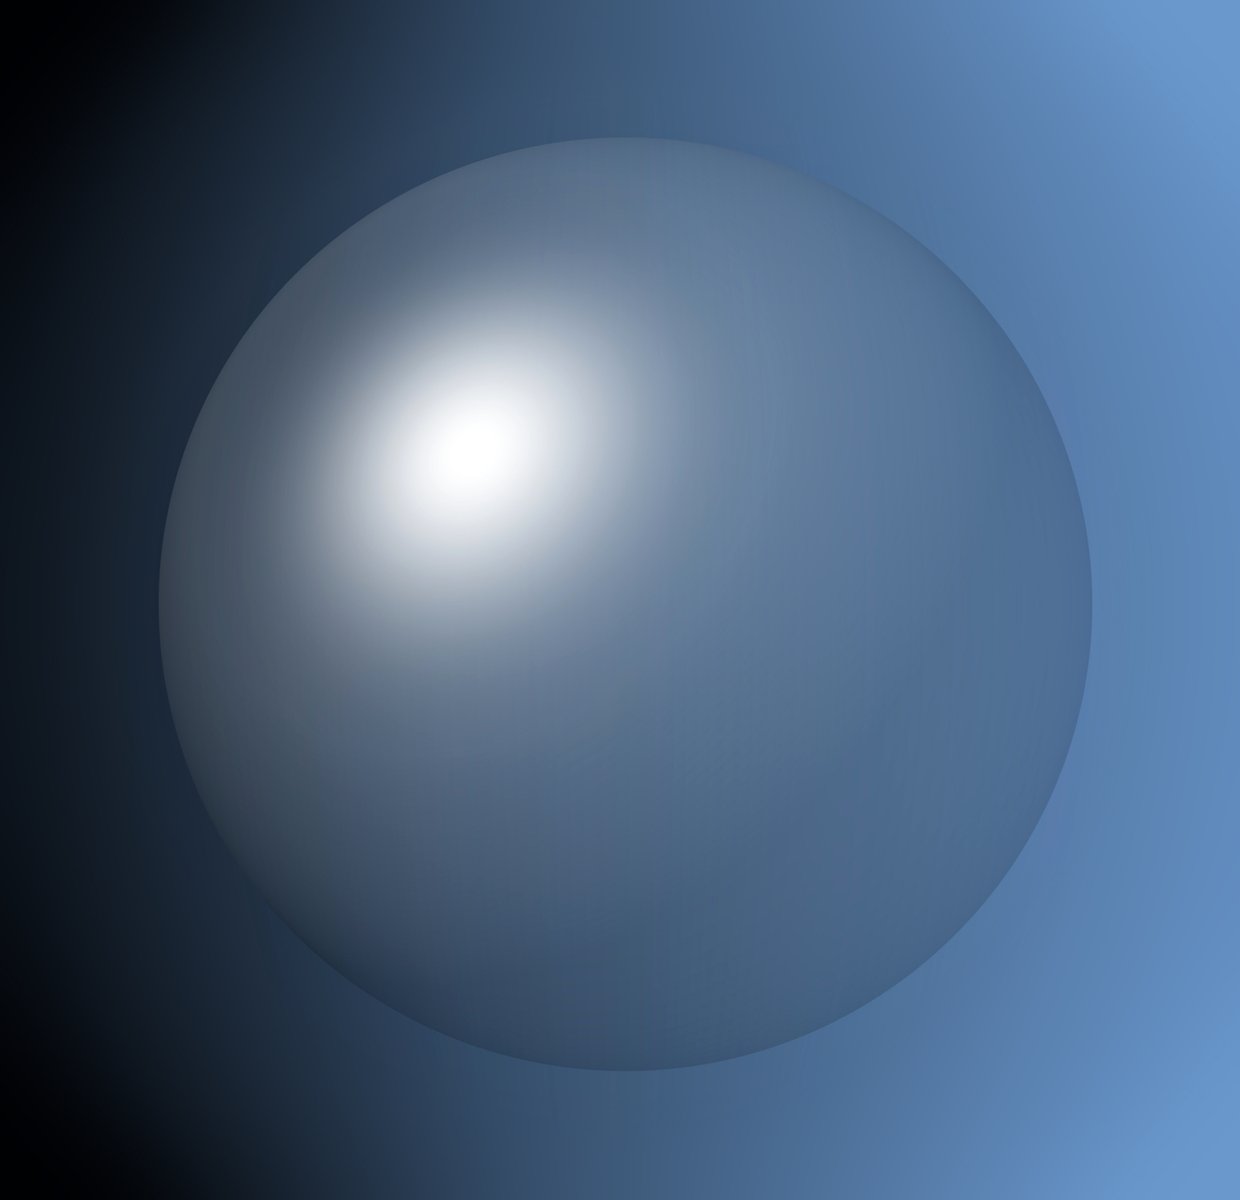 a large white object floating in a dark space